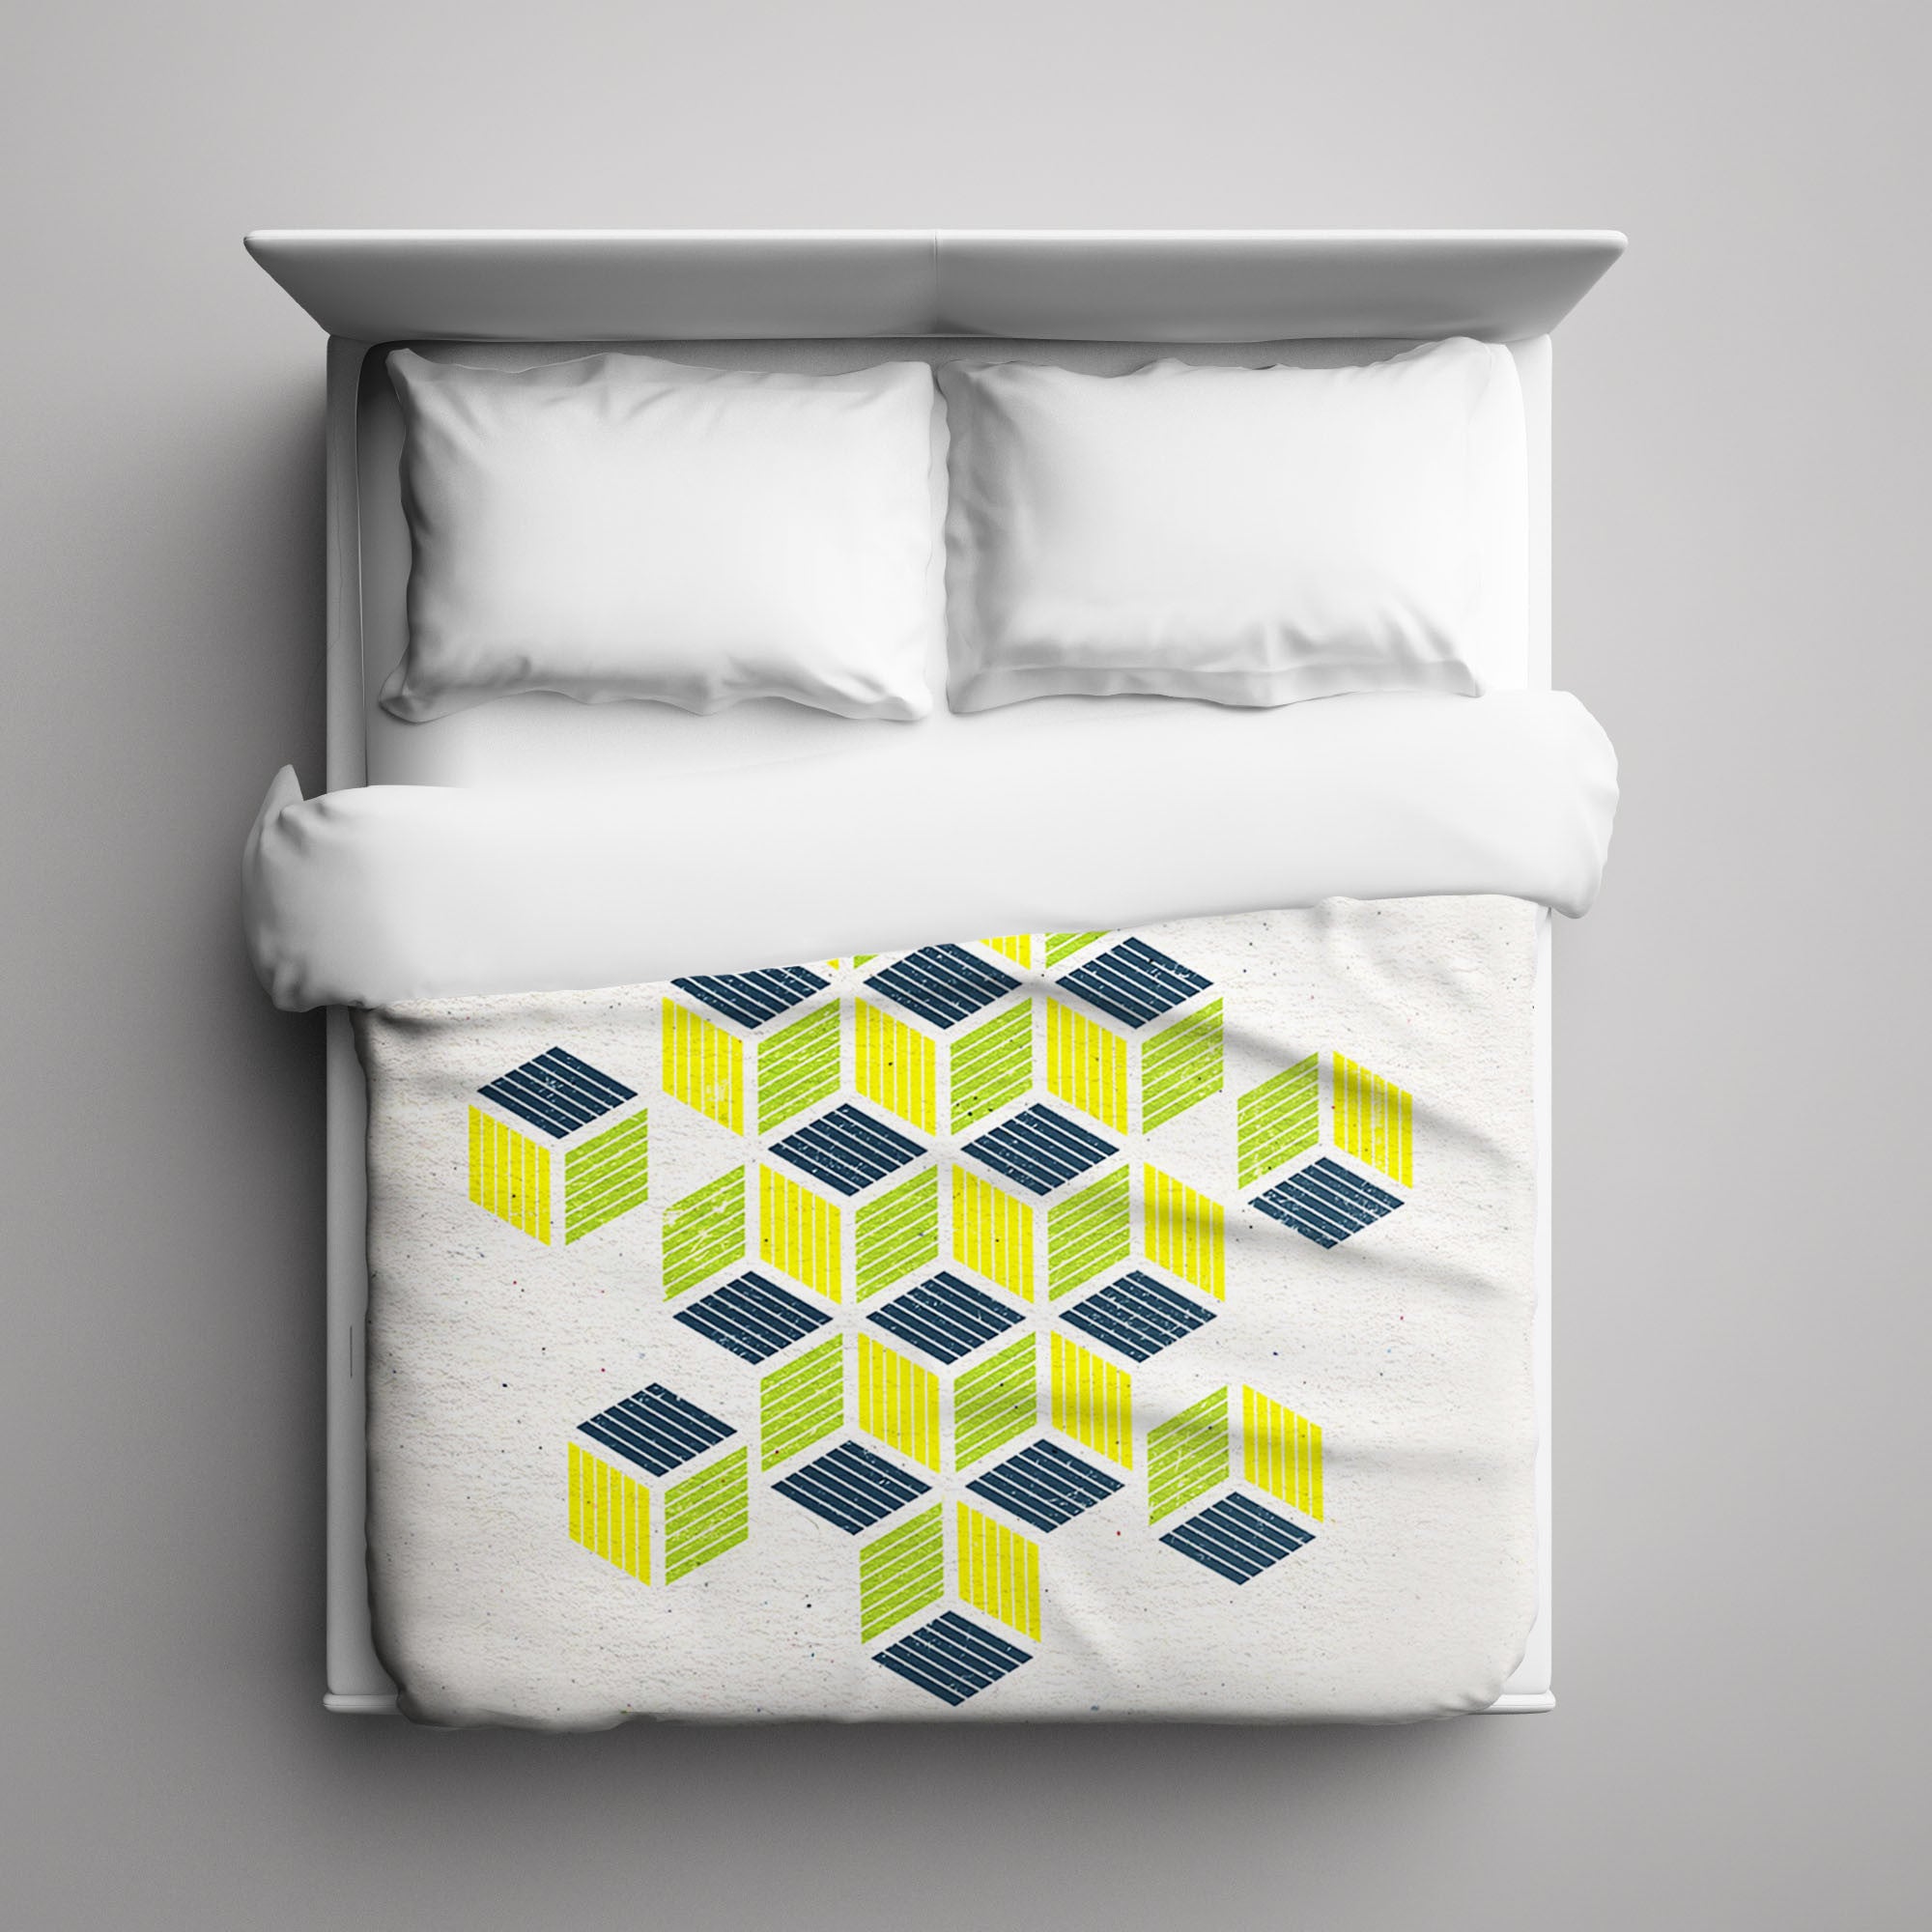 Duvet Cover Yellow Navy Squares By Rsks Design Mnml Decor